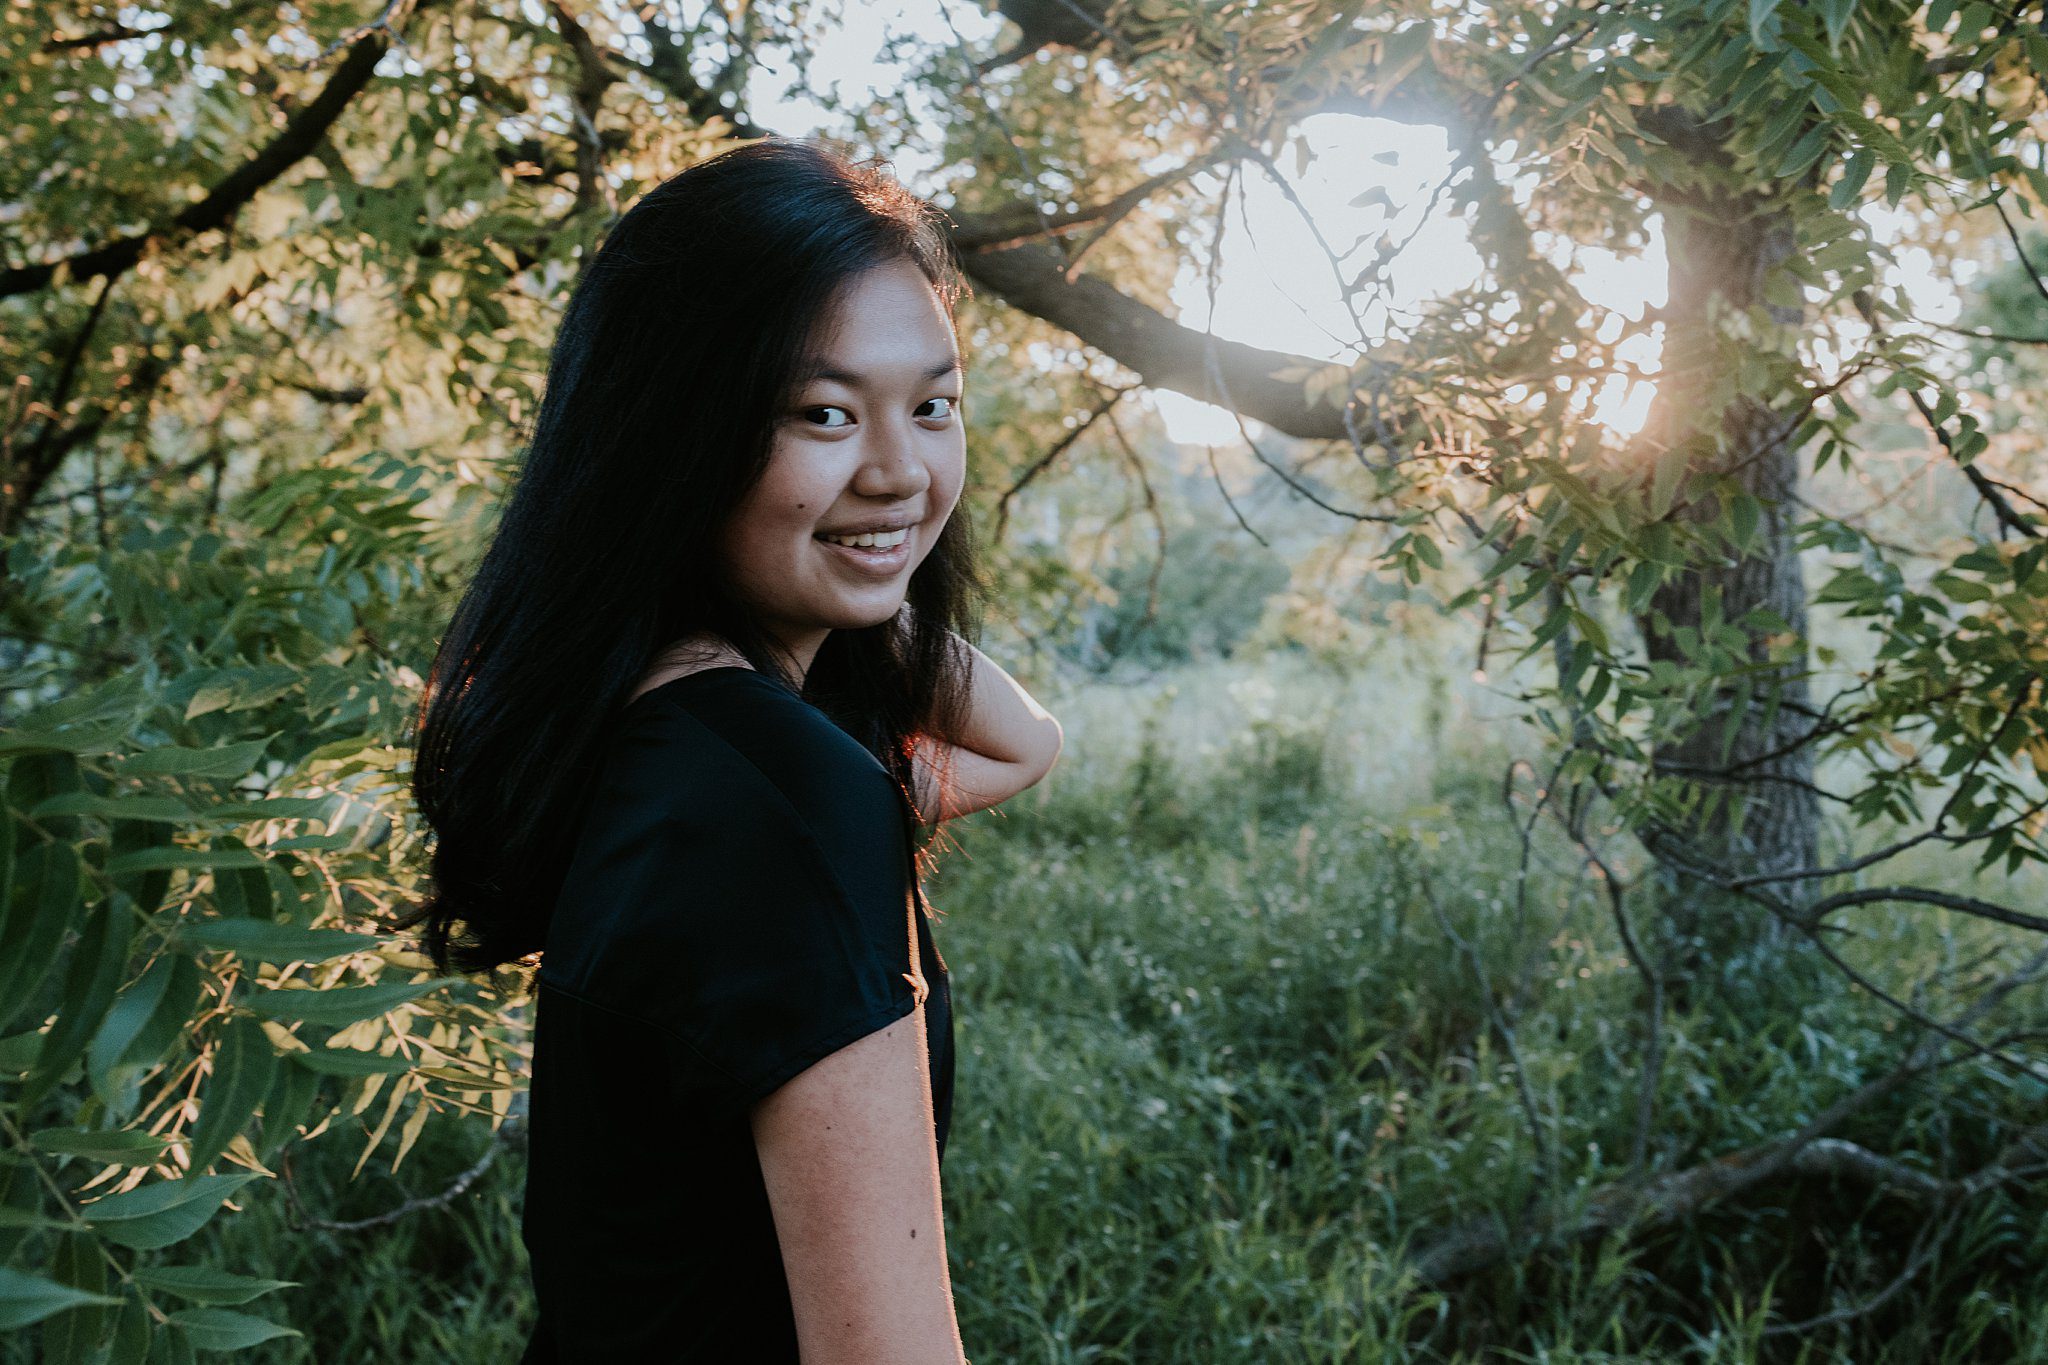 Senior photo of a girl in Northwest Iowa. She is smiling at the camera and her back arm is playing with her hair with her right arm in front of her. The sun is shining through the trees behind her and casting a golden glow.